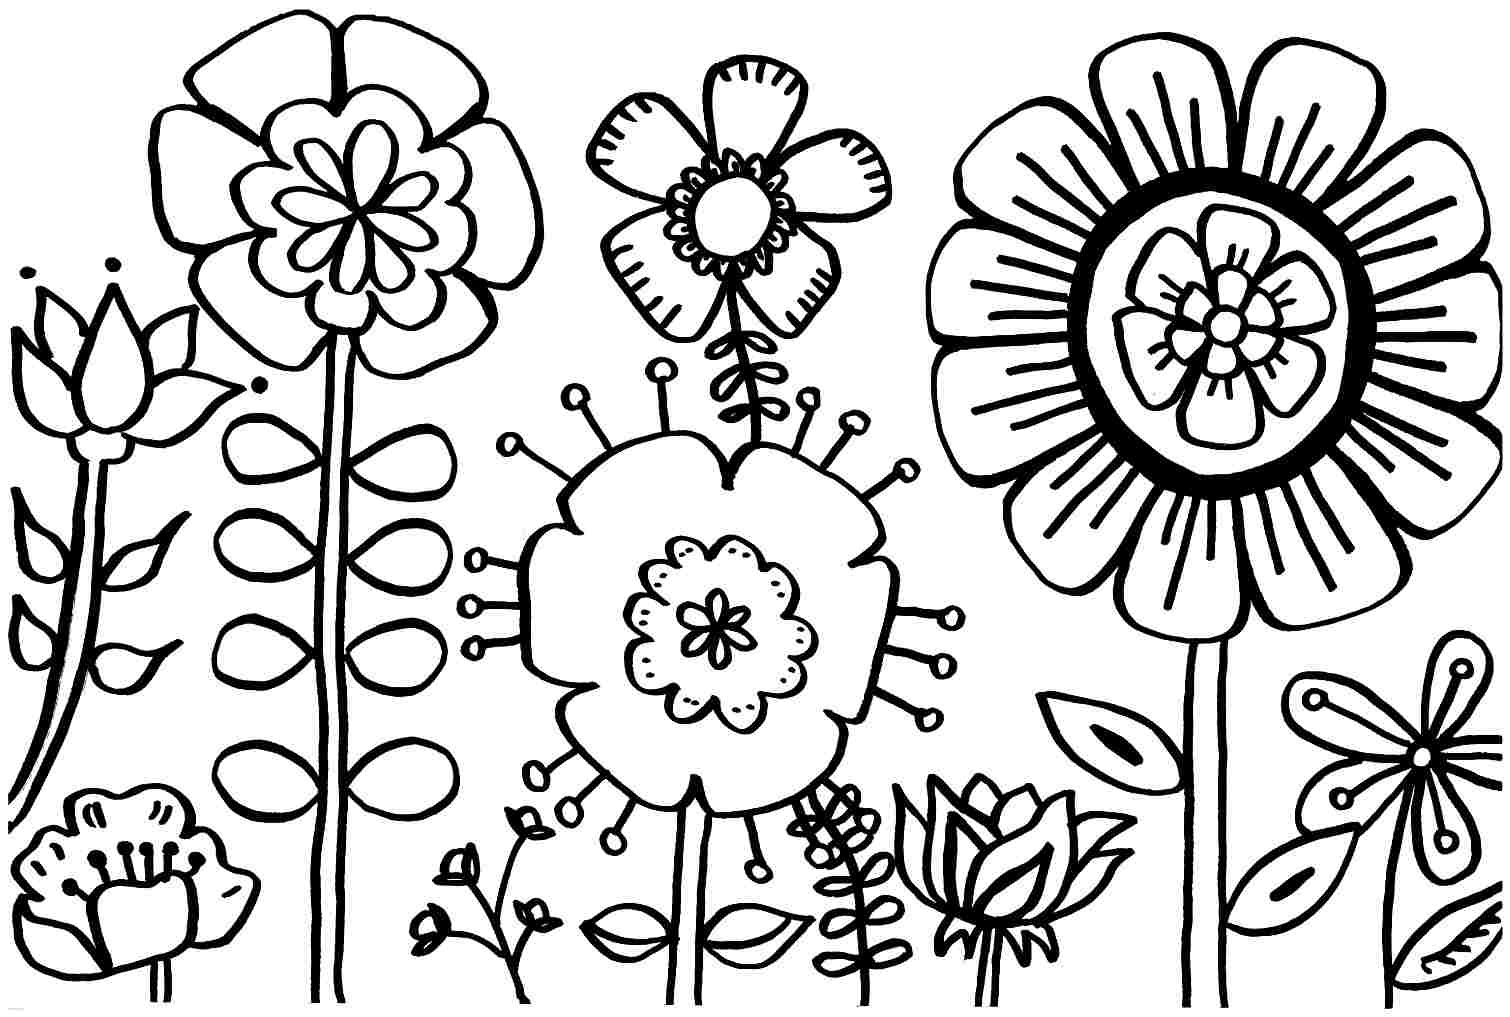 Coloring Pages : Fabulous Spring Flower Coloring Pages Flowers To - Free Printable Flower Coloring Pages